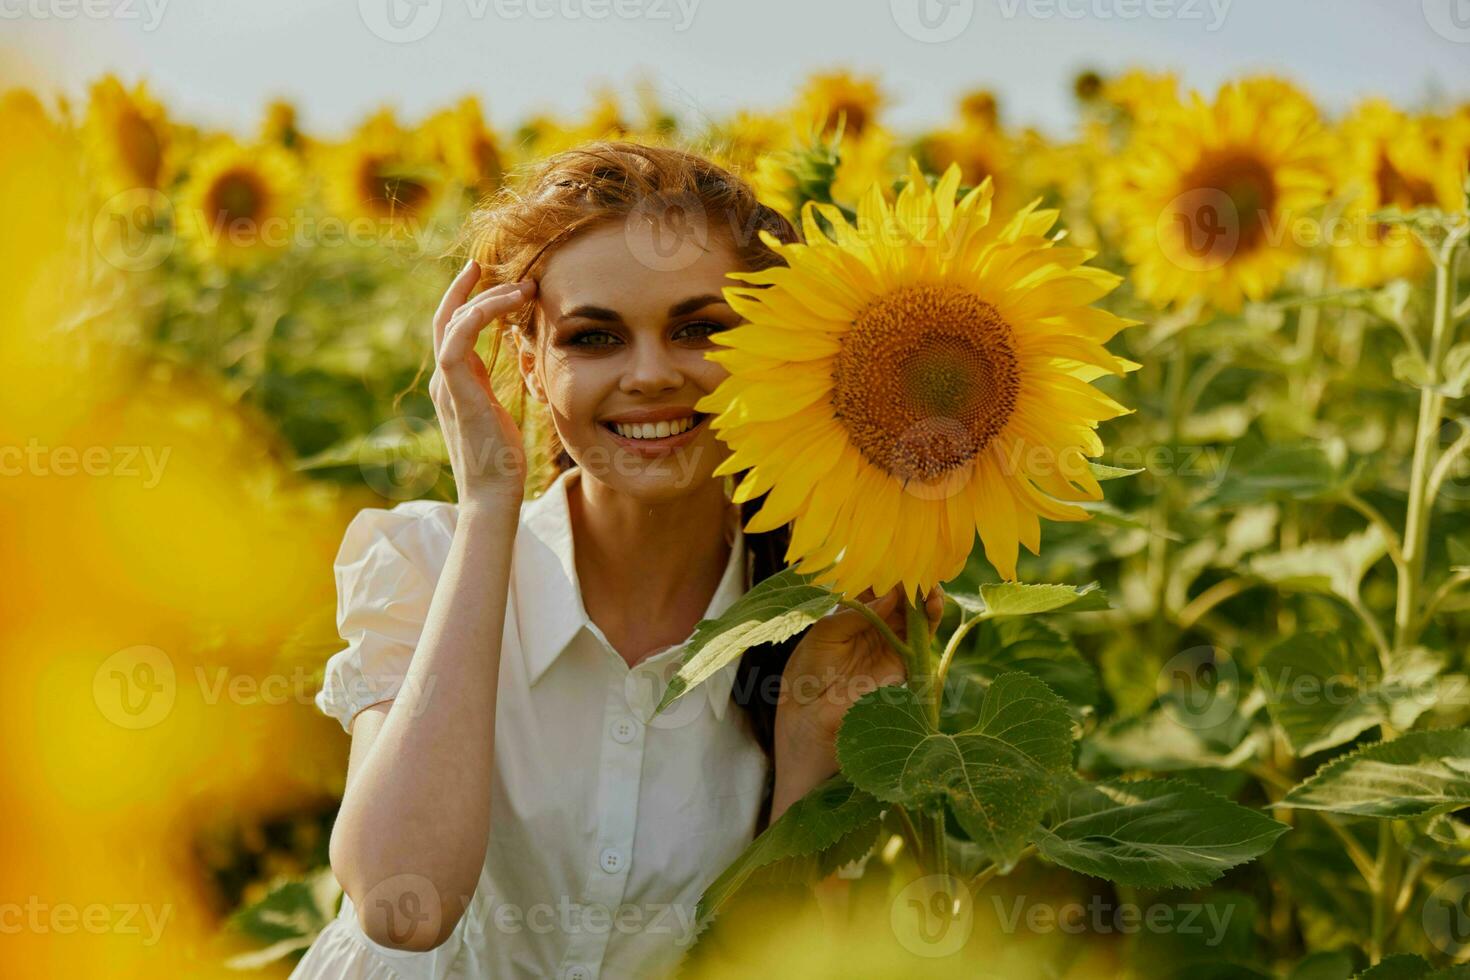 woman with two pigtails in a white dress admires nature flowering plants photo